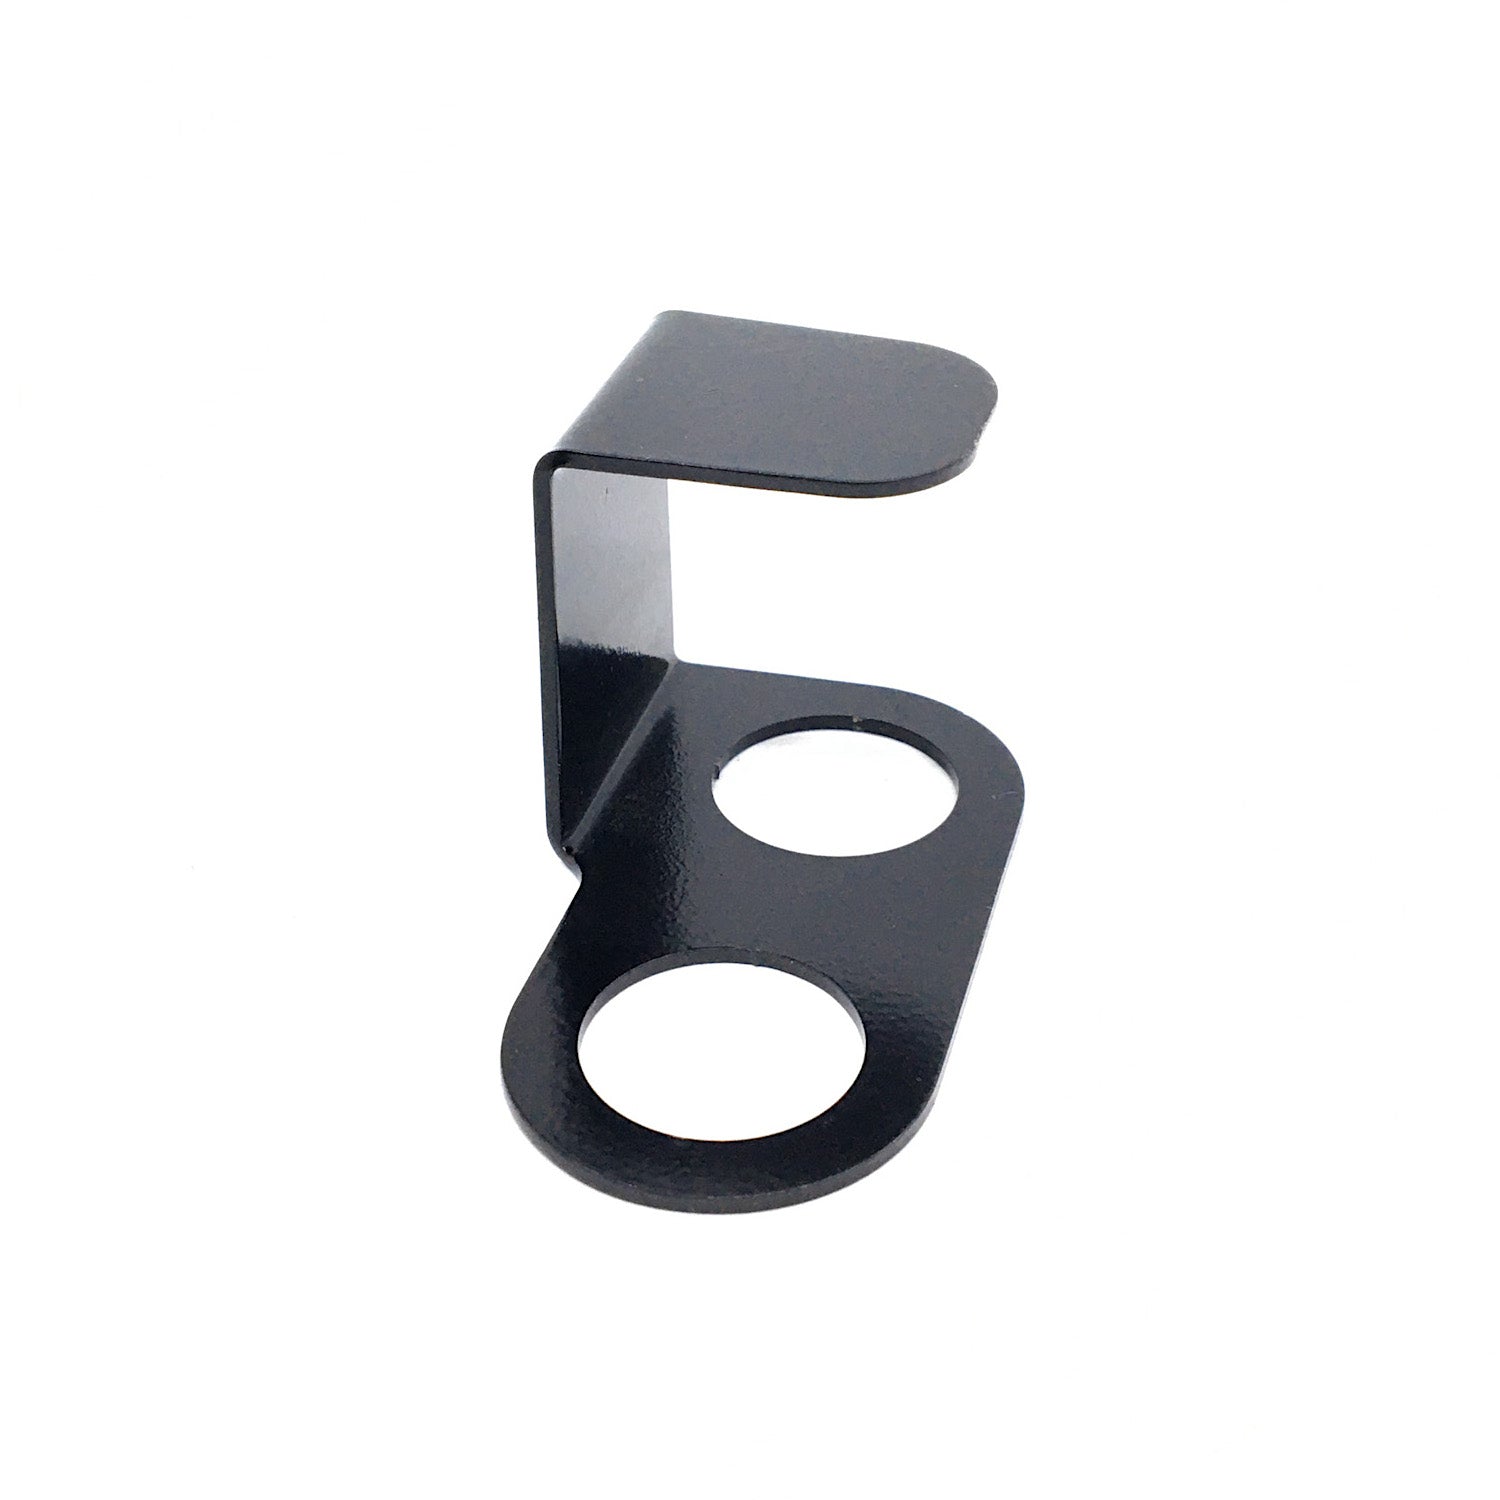 (303A) IAME Security Bracket (16mm Stop Button)